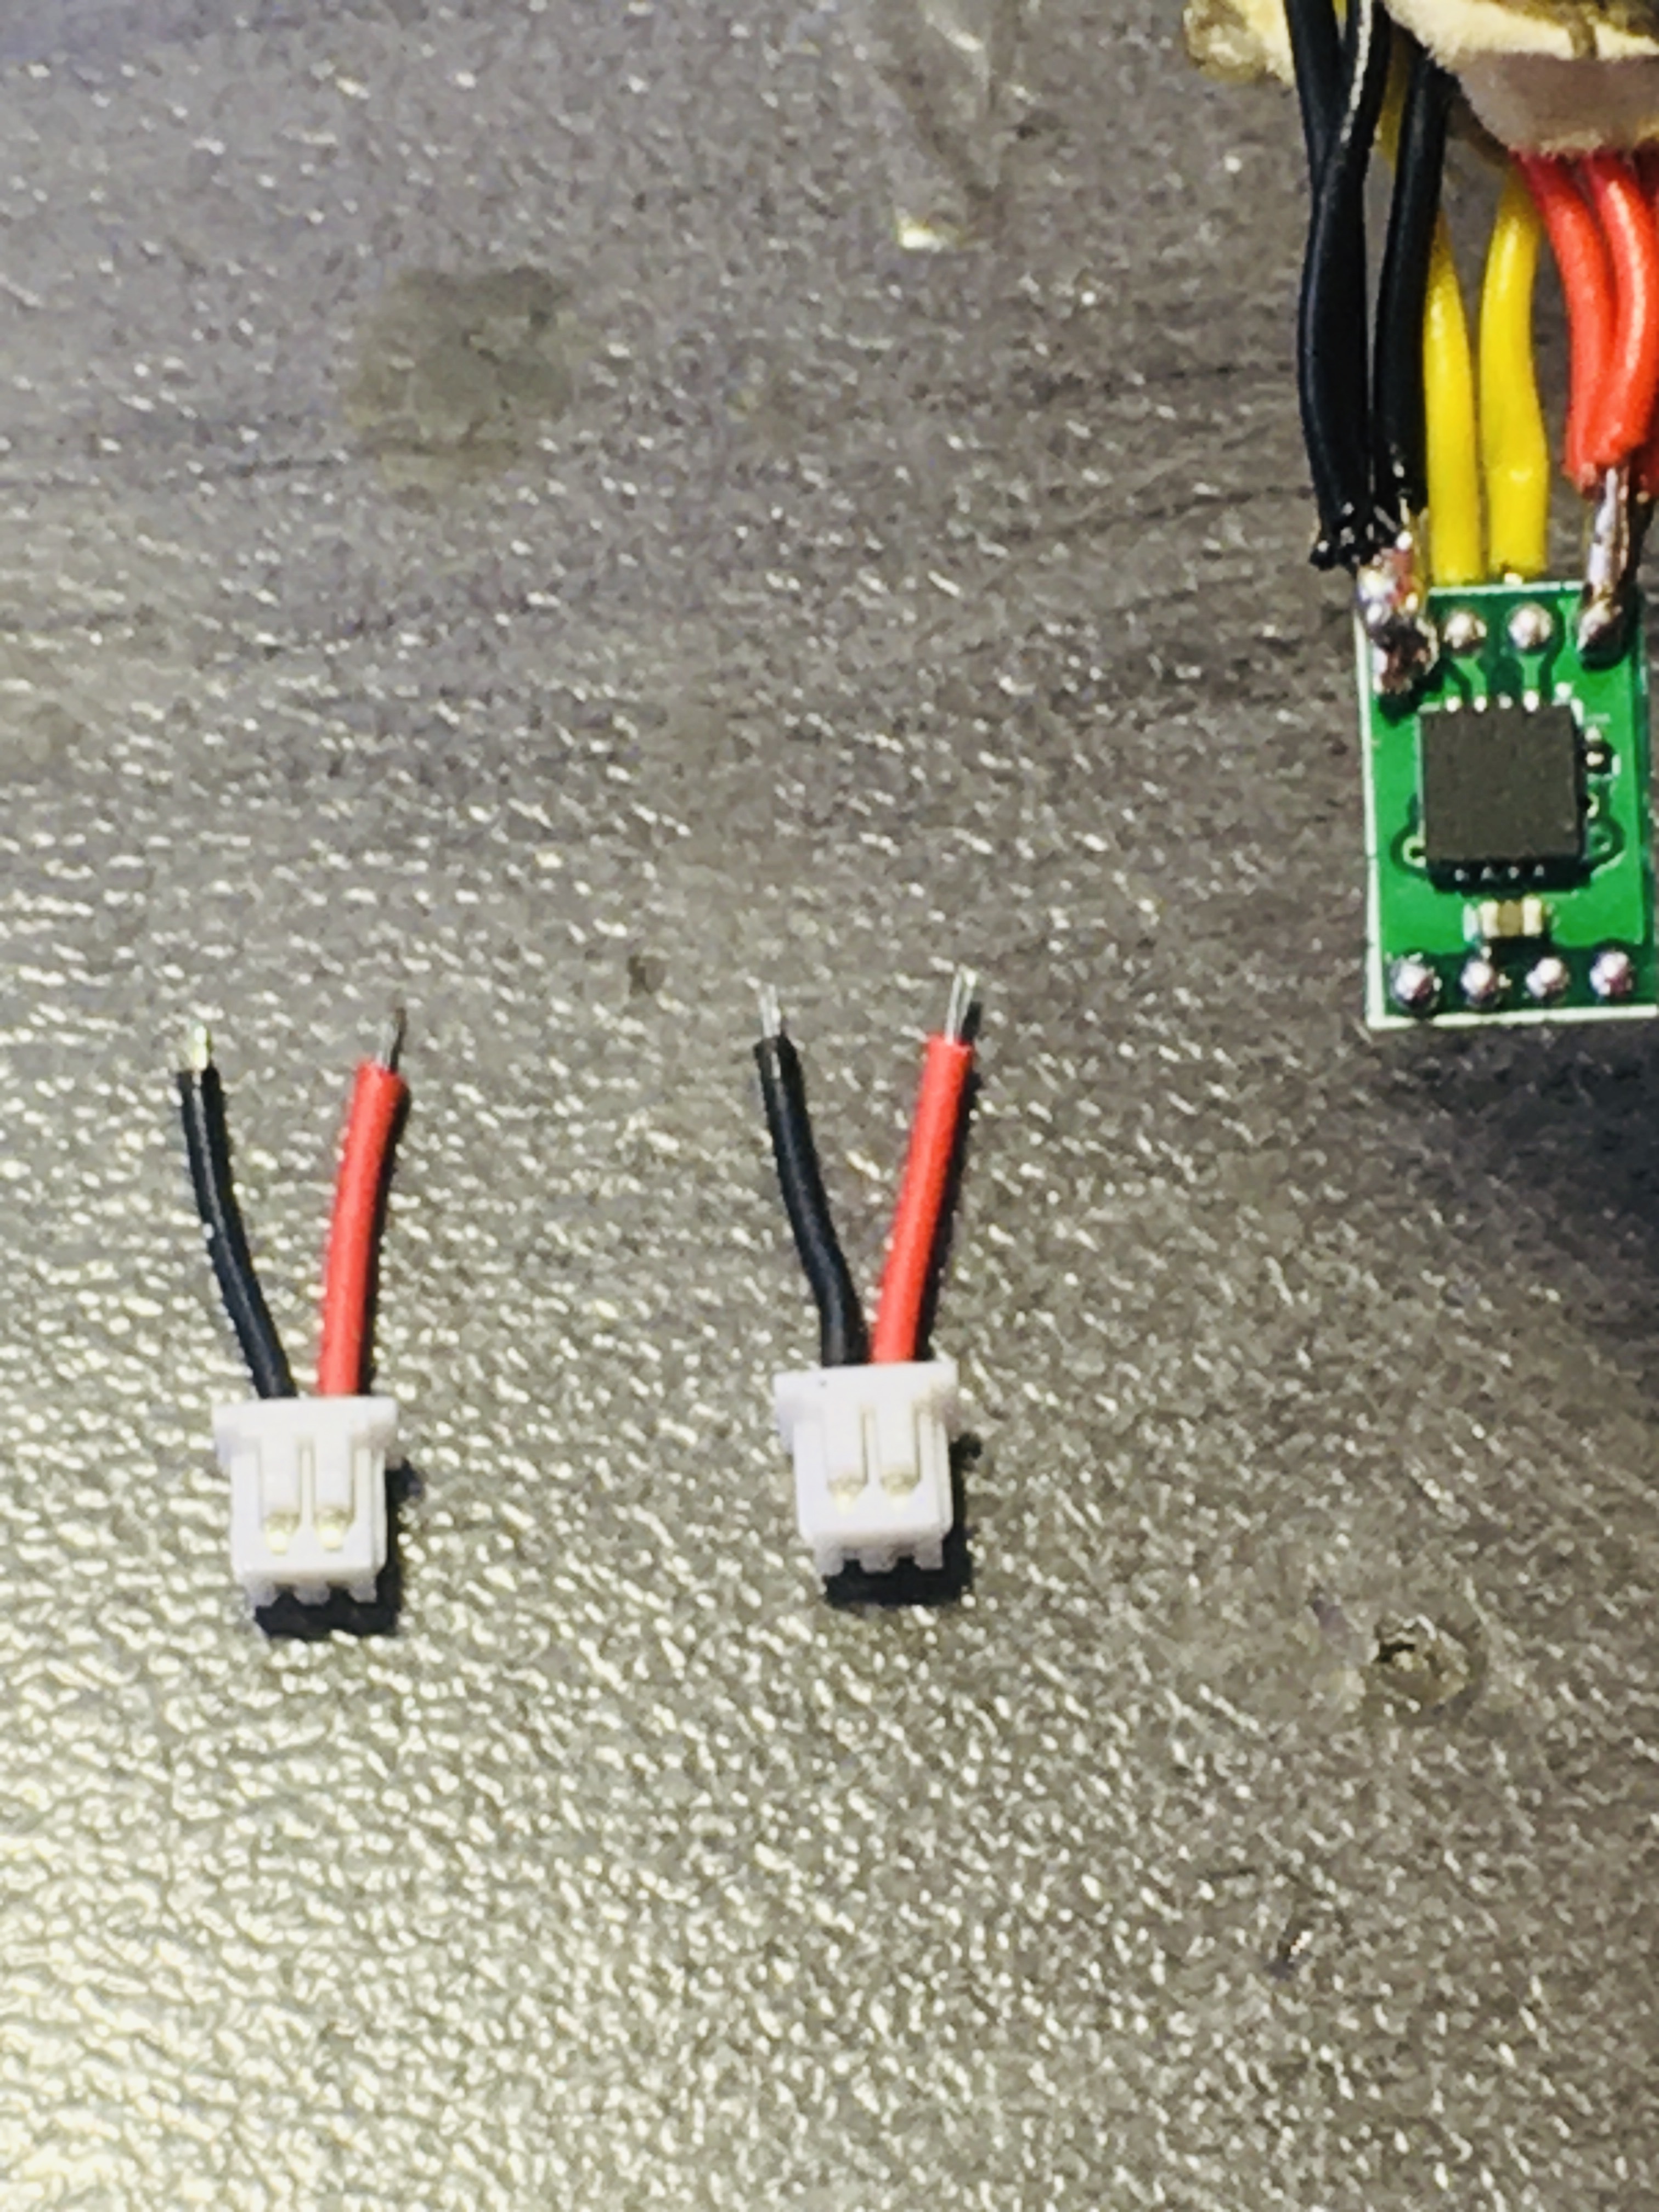 This is the OUTPUT side of the ESC. Those are 1.25 mm female micro JST connectors with 26 AWG wire.